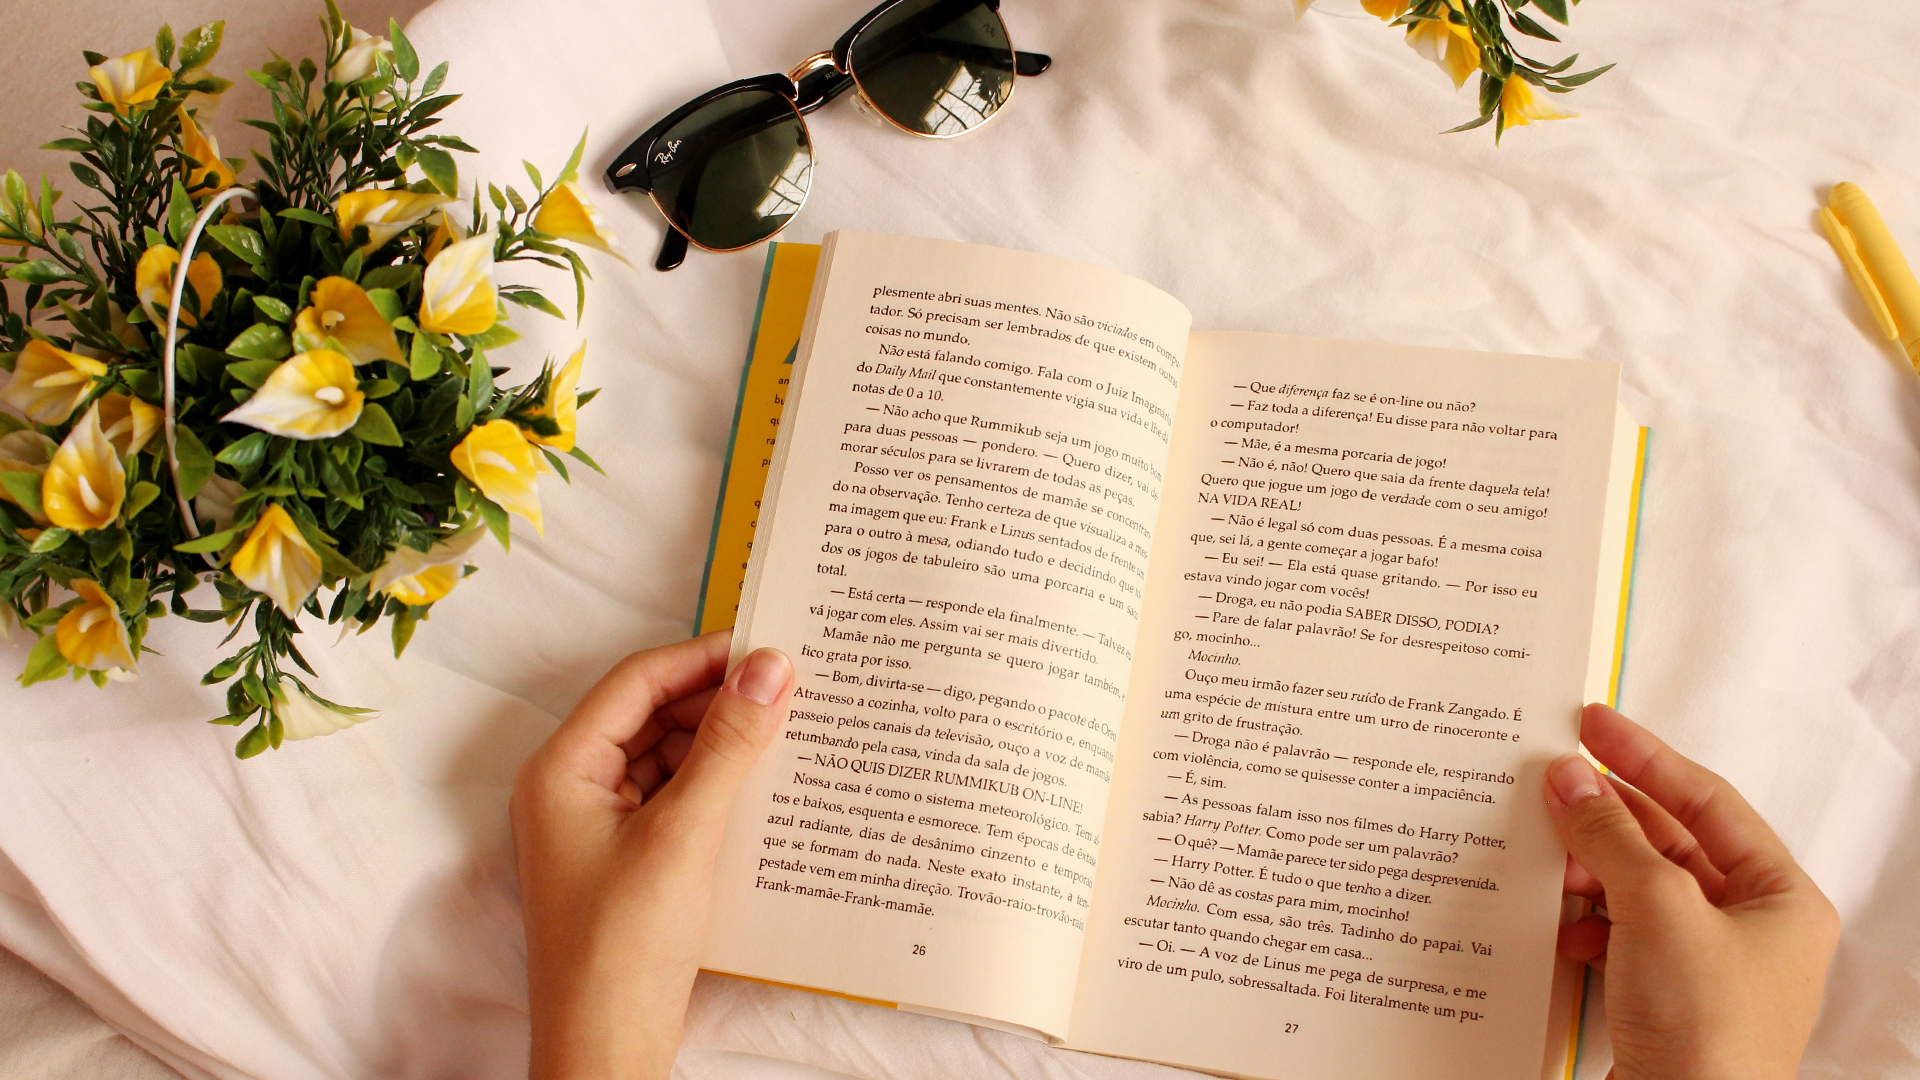 Person reading a book with yellow flowers surrounding it.